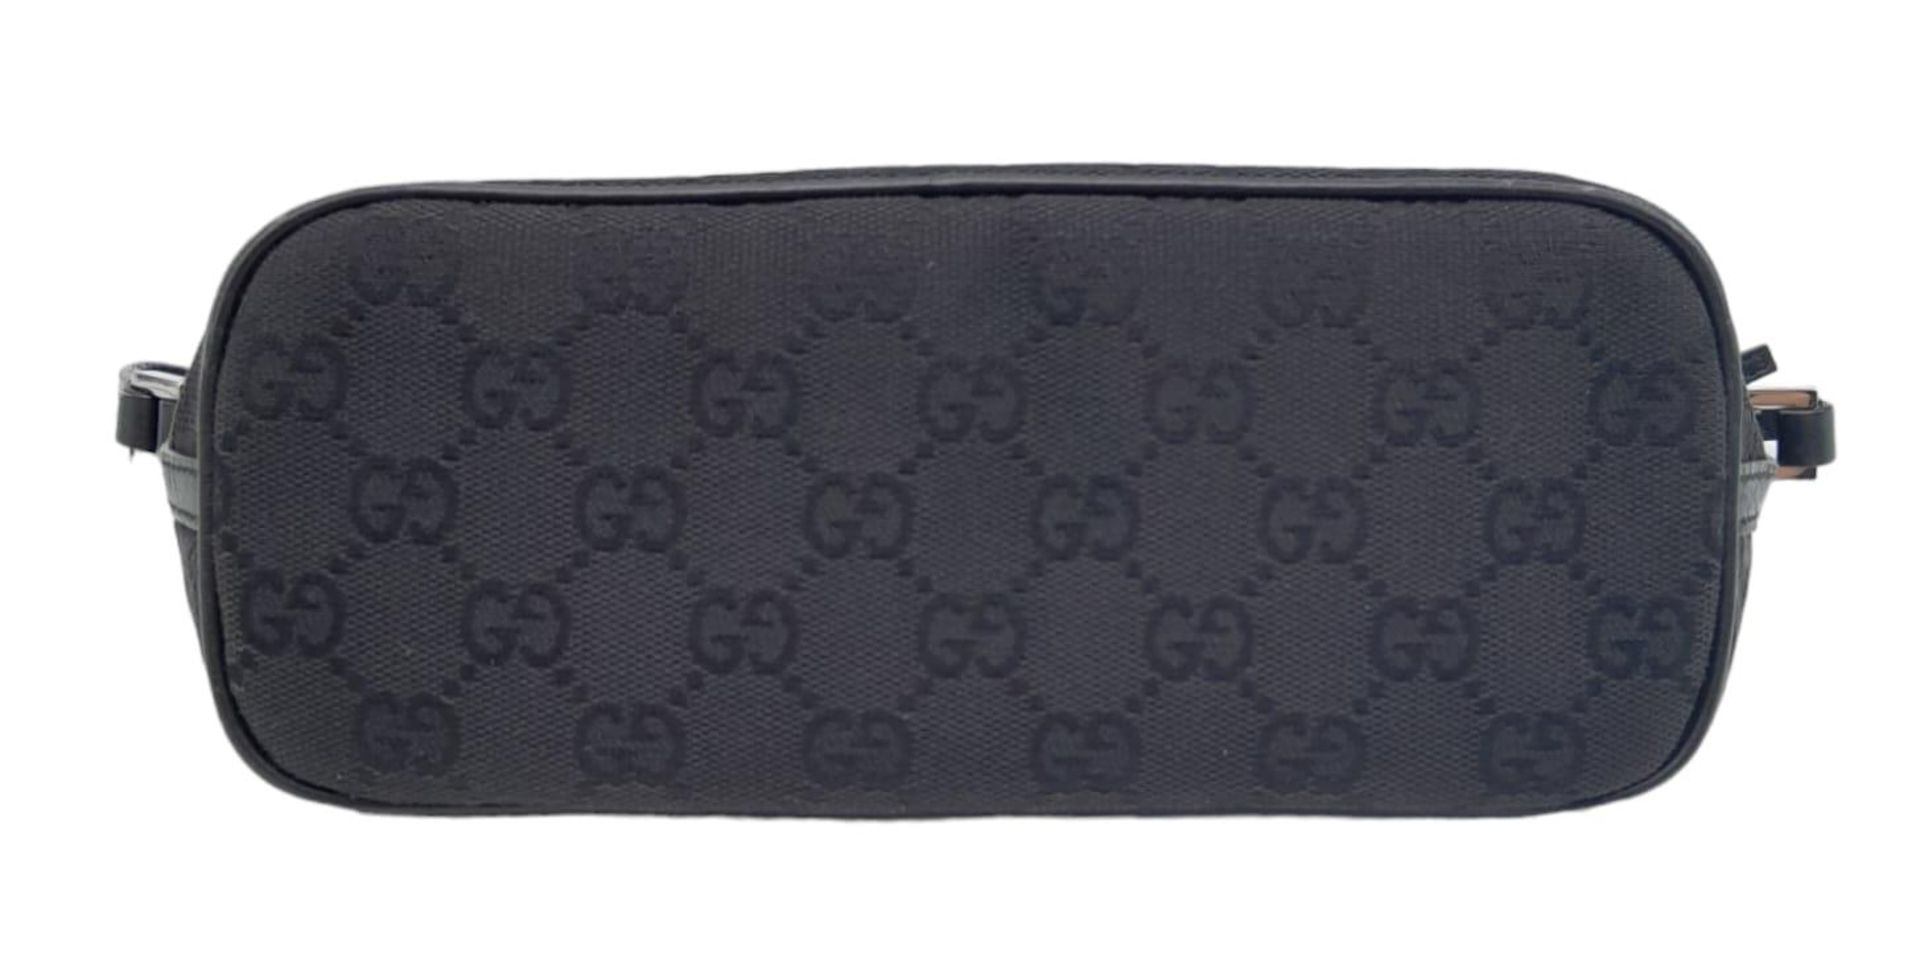 A Gucci Black Monogram Pochette Boat Bag. Textile exterior with black and silver-toned hardware, - Image 3 of 7